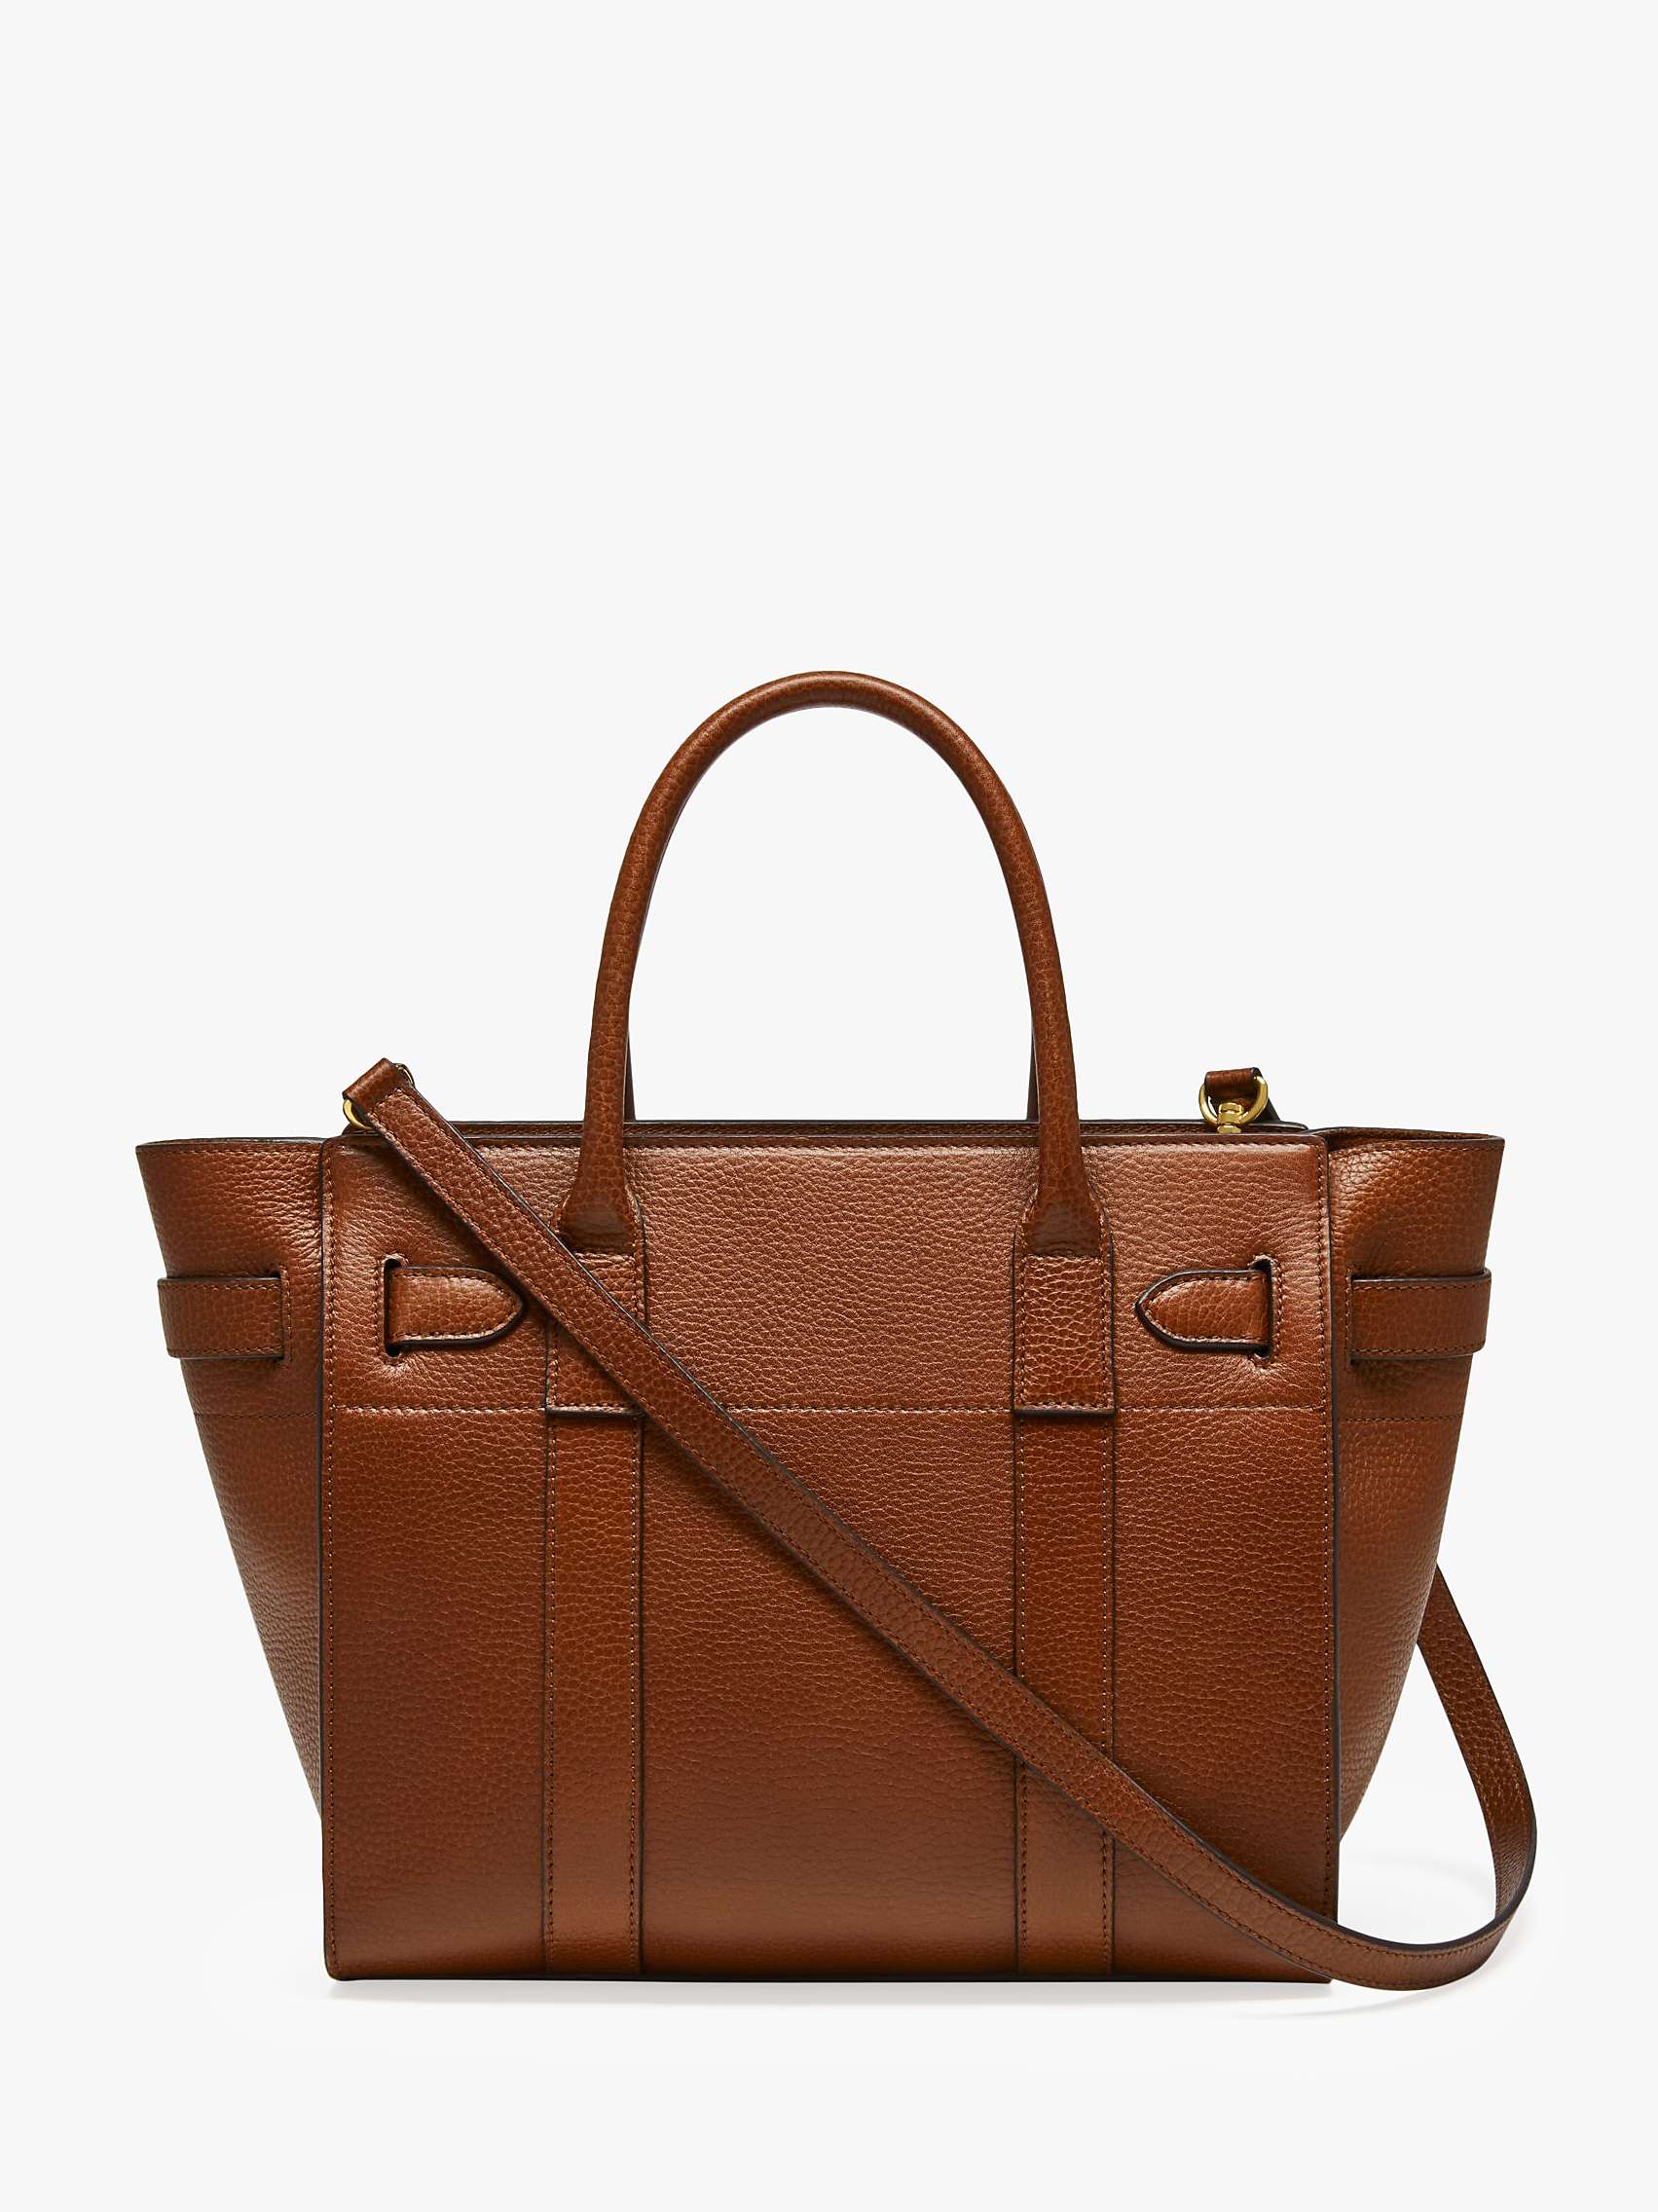 Buy Mulberry Small Bayswater Zipped Grain Veg Tanned Leather Tote Bag Online at johnlewis.com